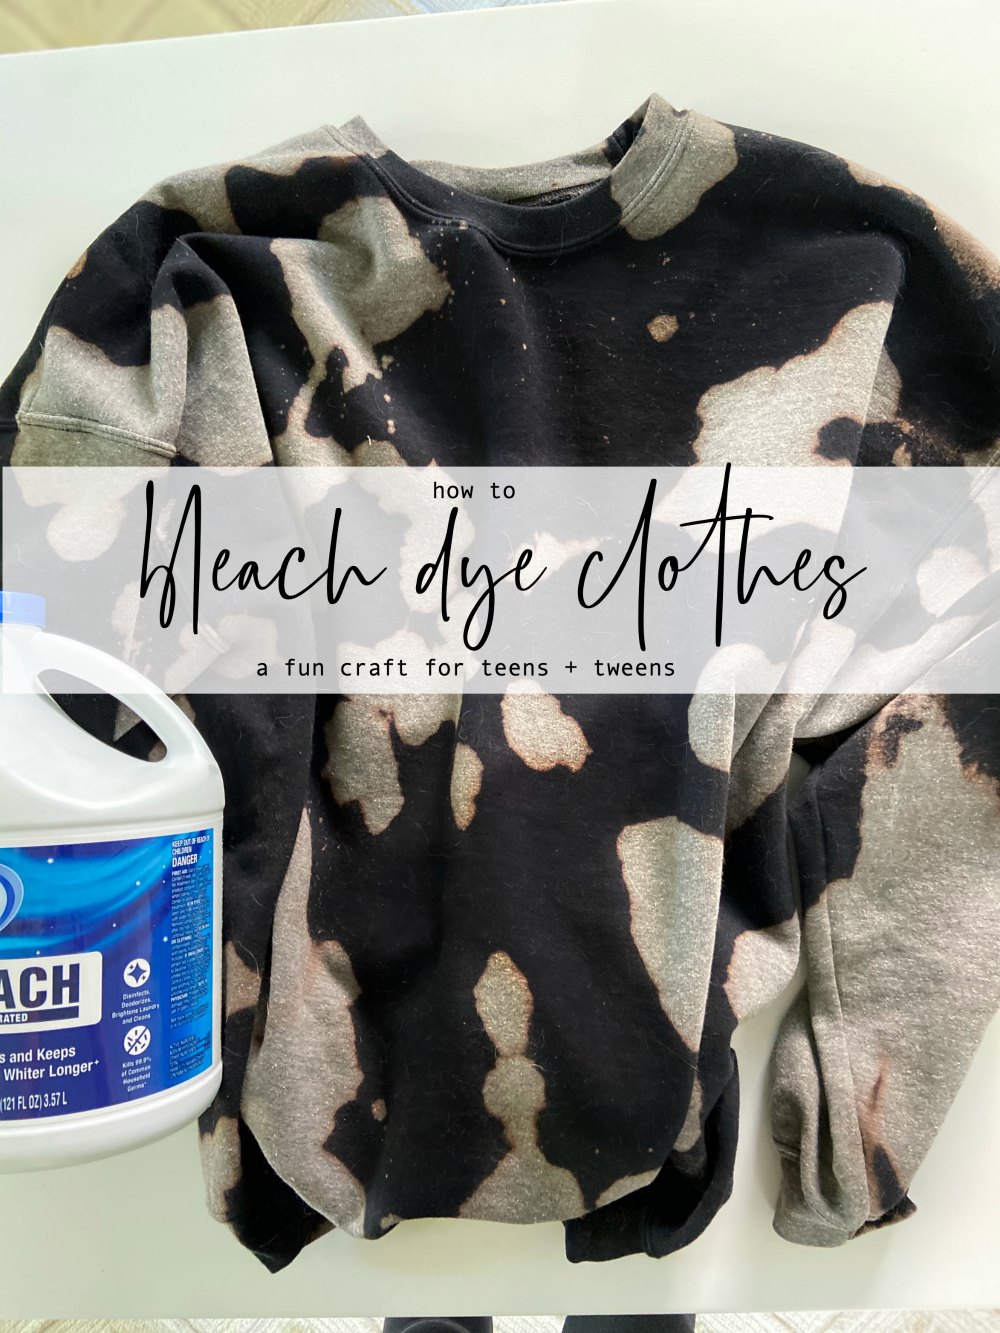 How to Bleach Dye Clothes - a FUN teen or tween craft. Bleach Dying clothes is a fun summer craft. All you need is bleach to give old clothes a brand new look!